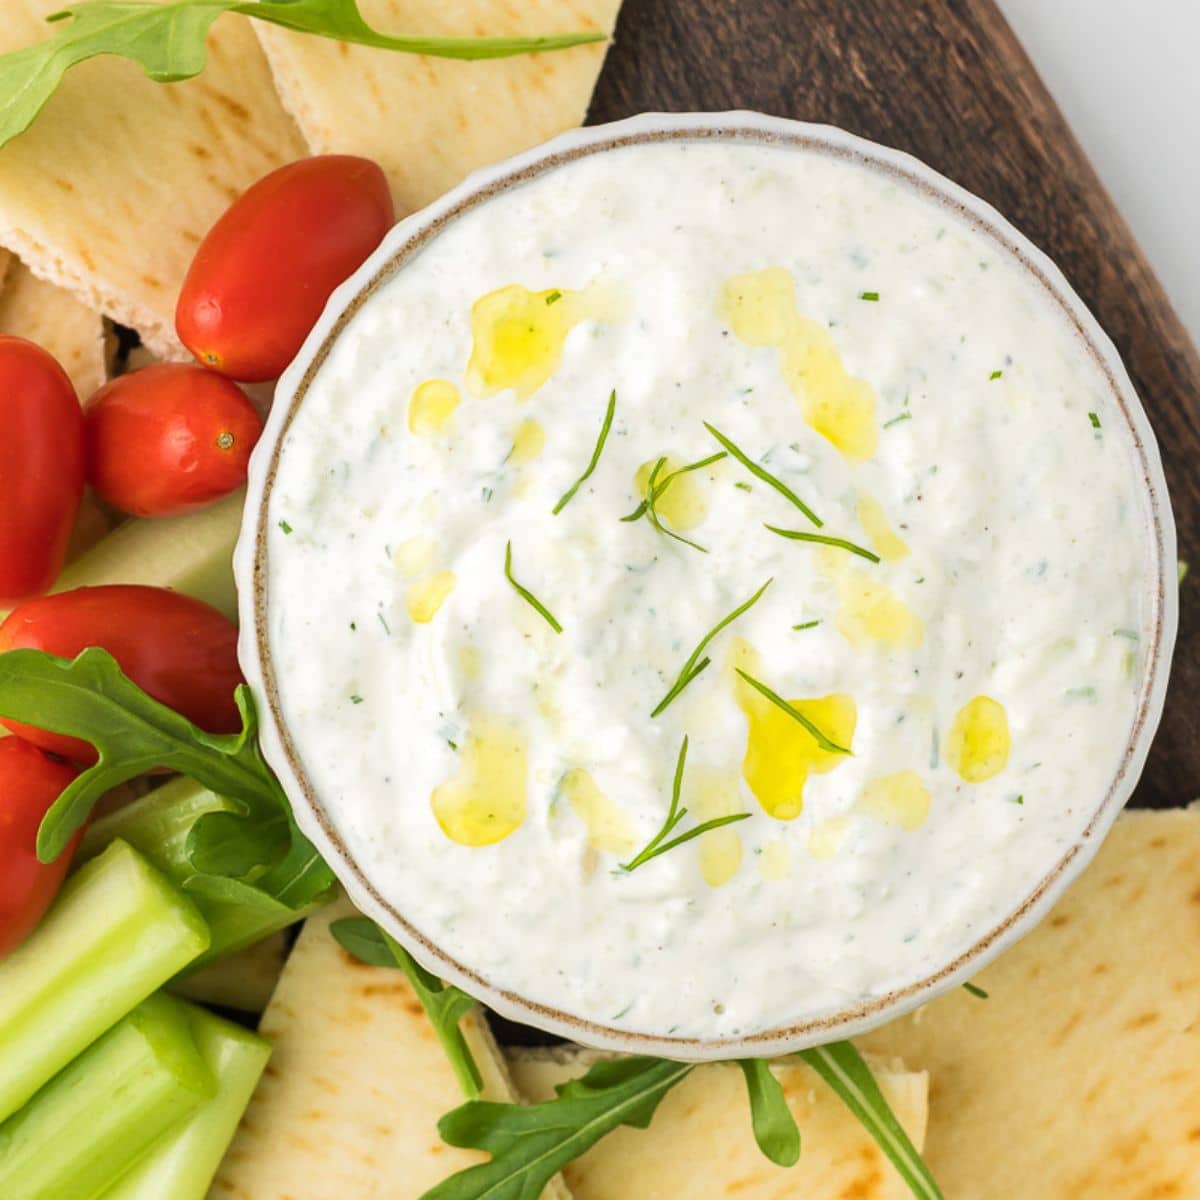 Tzatziki sauce in a bowl with pita bread and vegetables.